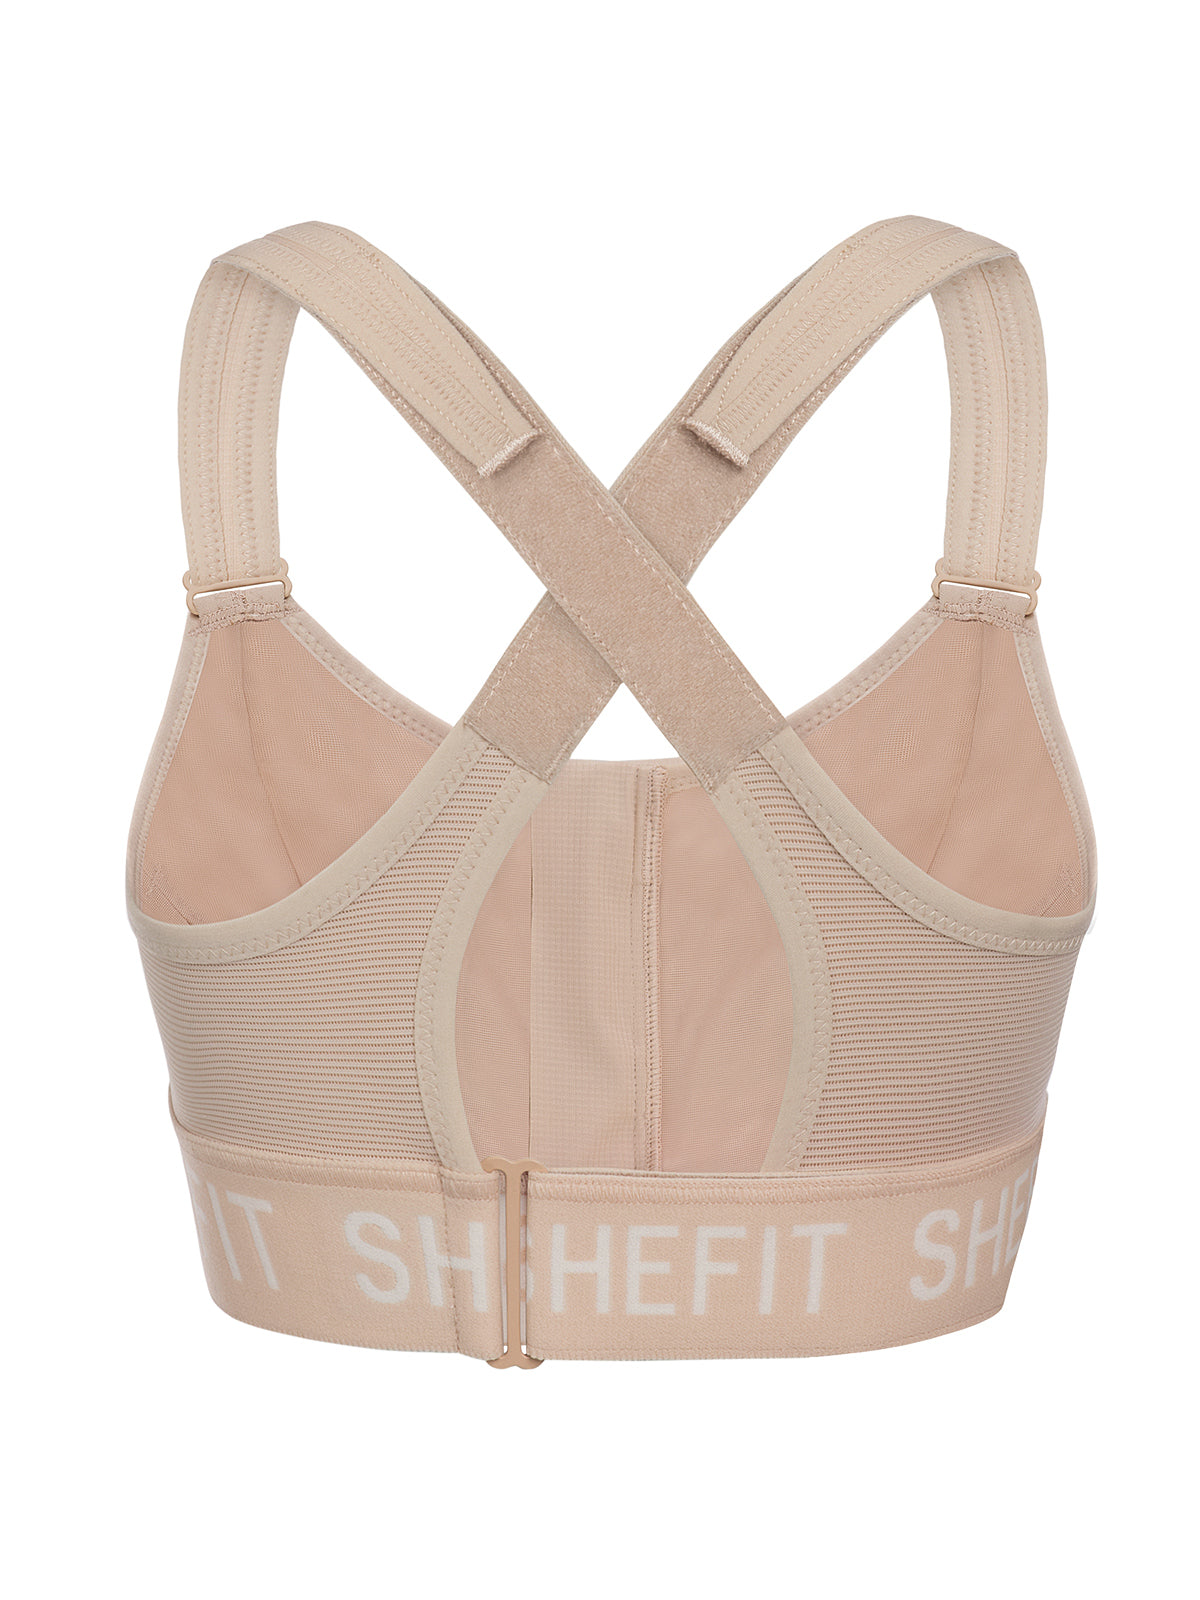 New SHEFIT Tie Dry Ultimate Sports Bra 6 LUXE High Impact Zipper Adjustable  PADS